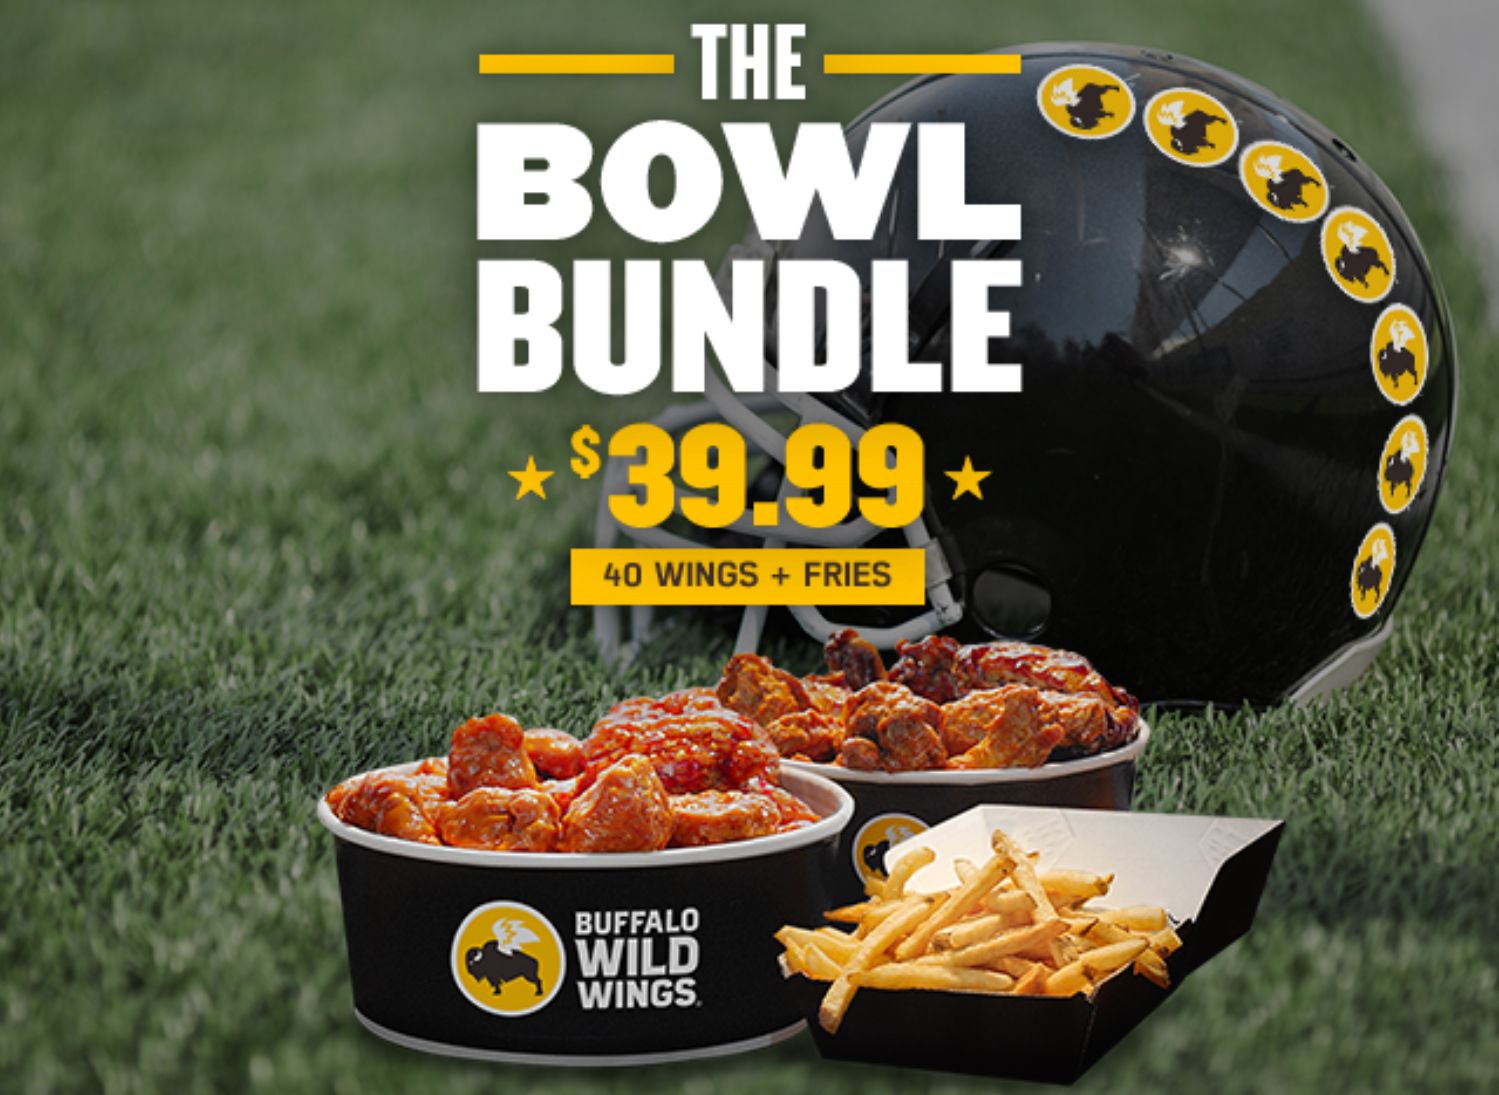 The New 39.99 Bowl Bundle is Touching Down at Buffalo Wild Wings for a